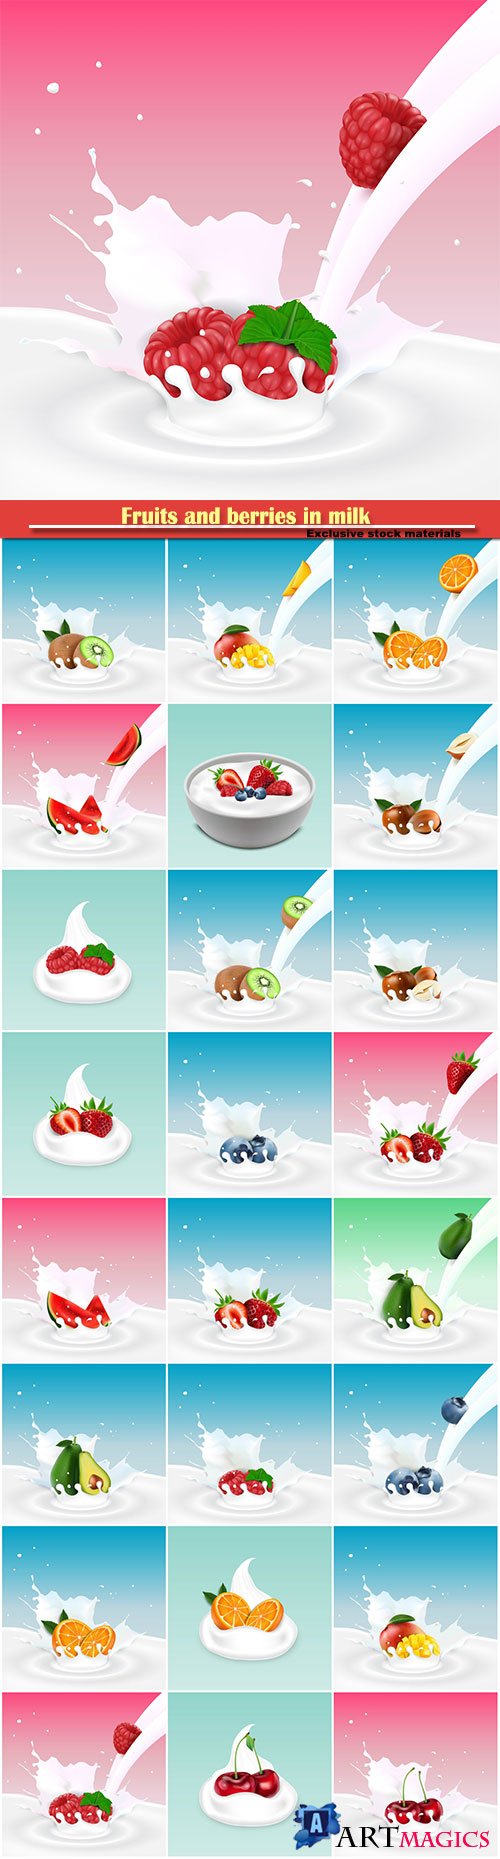 Fruits and berries in milk, vector illustration